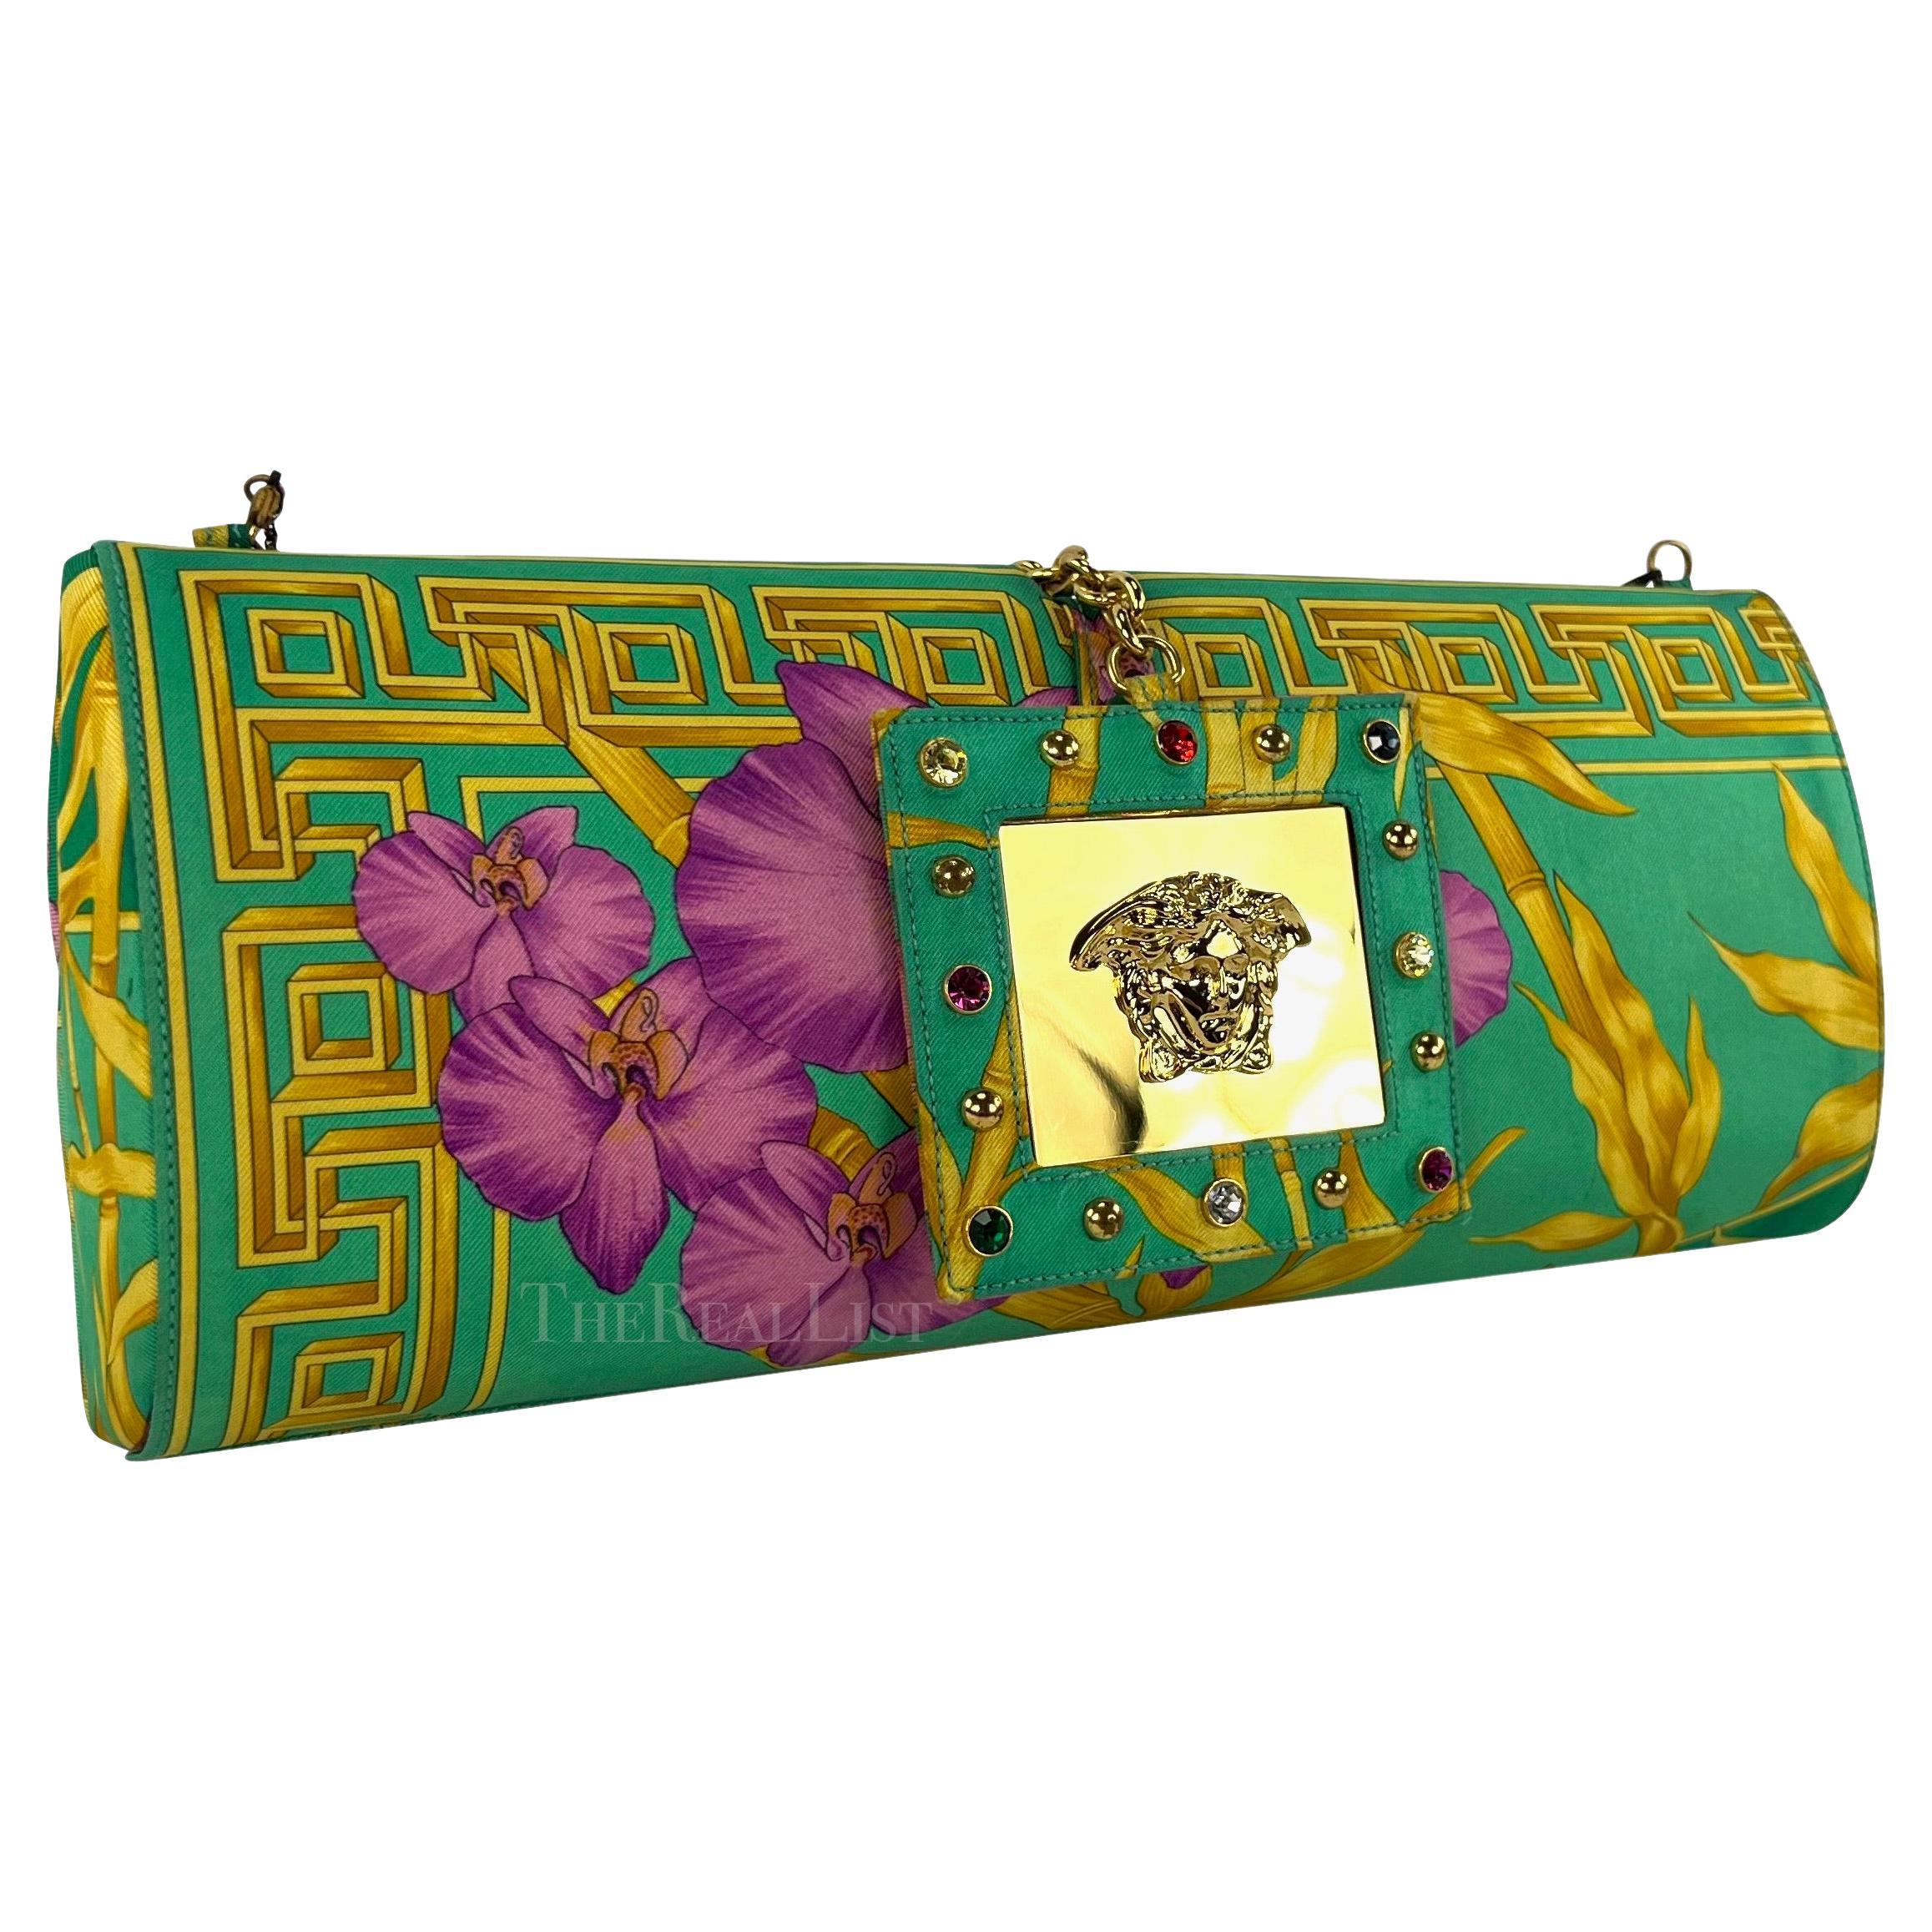 S/S 2000 Gianni Versace by Donatella Green Floral Convertible Runway Clutch For Sale